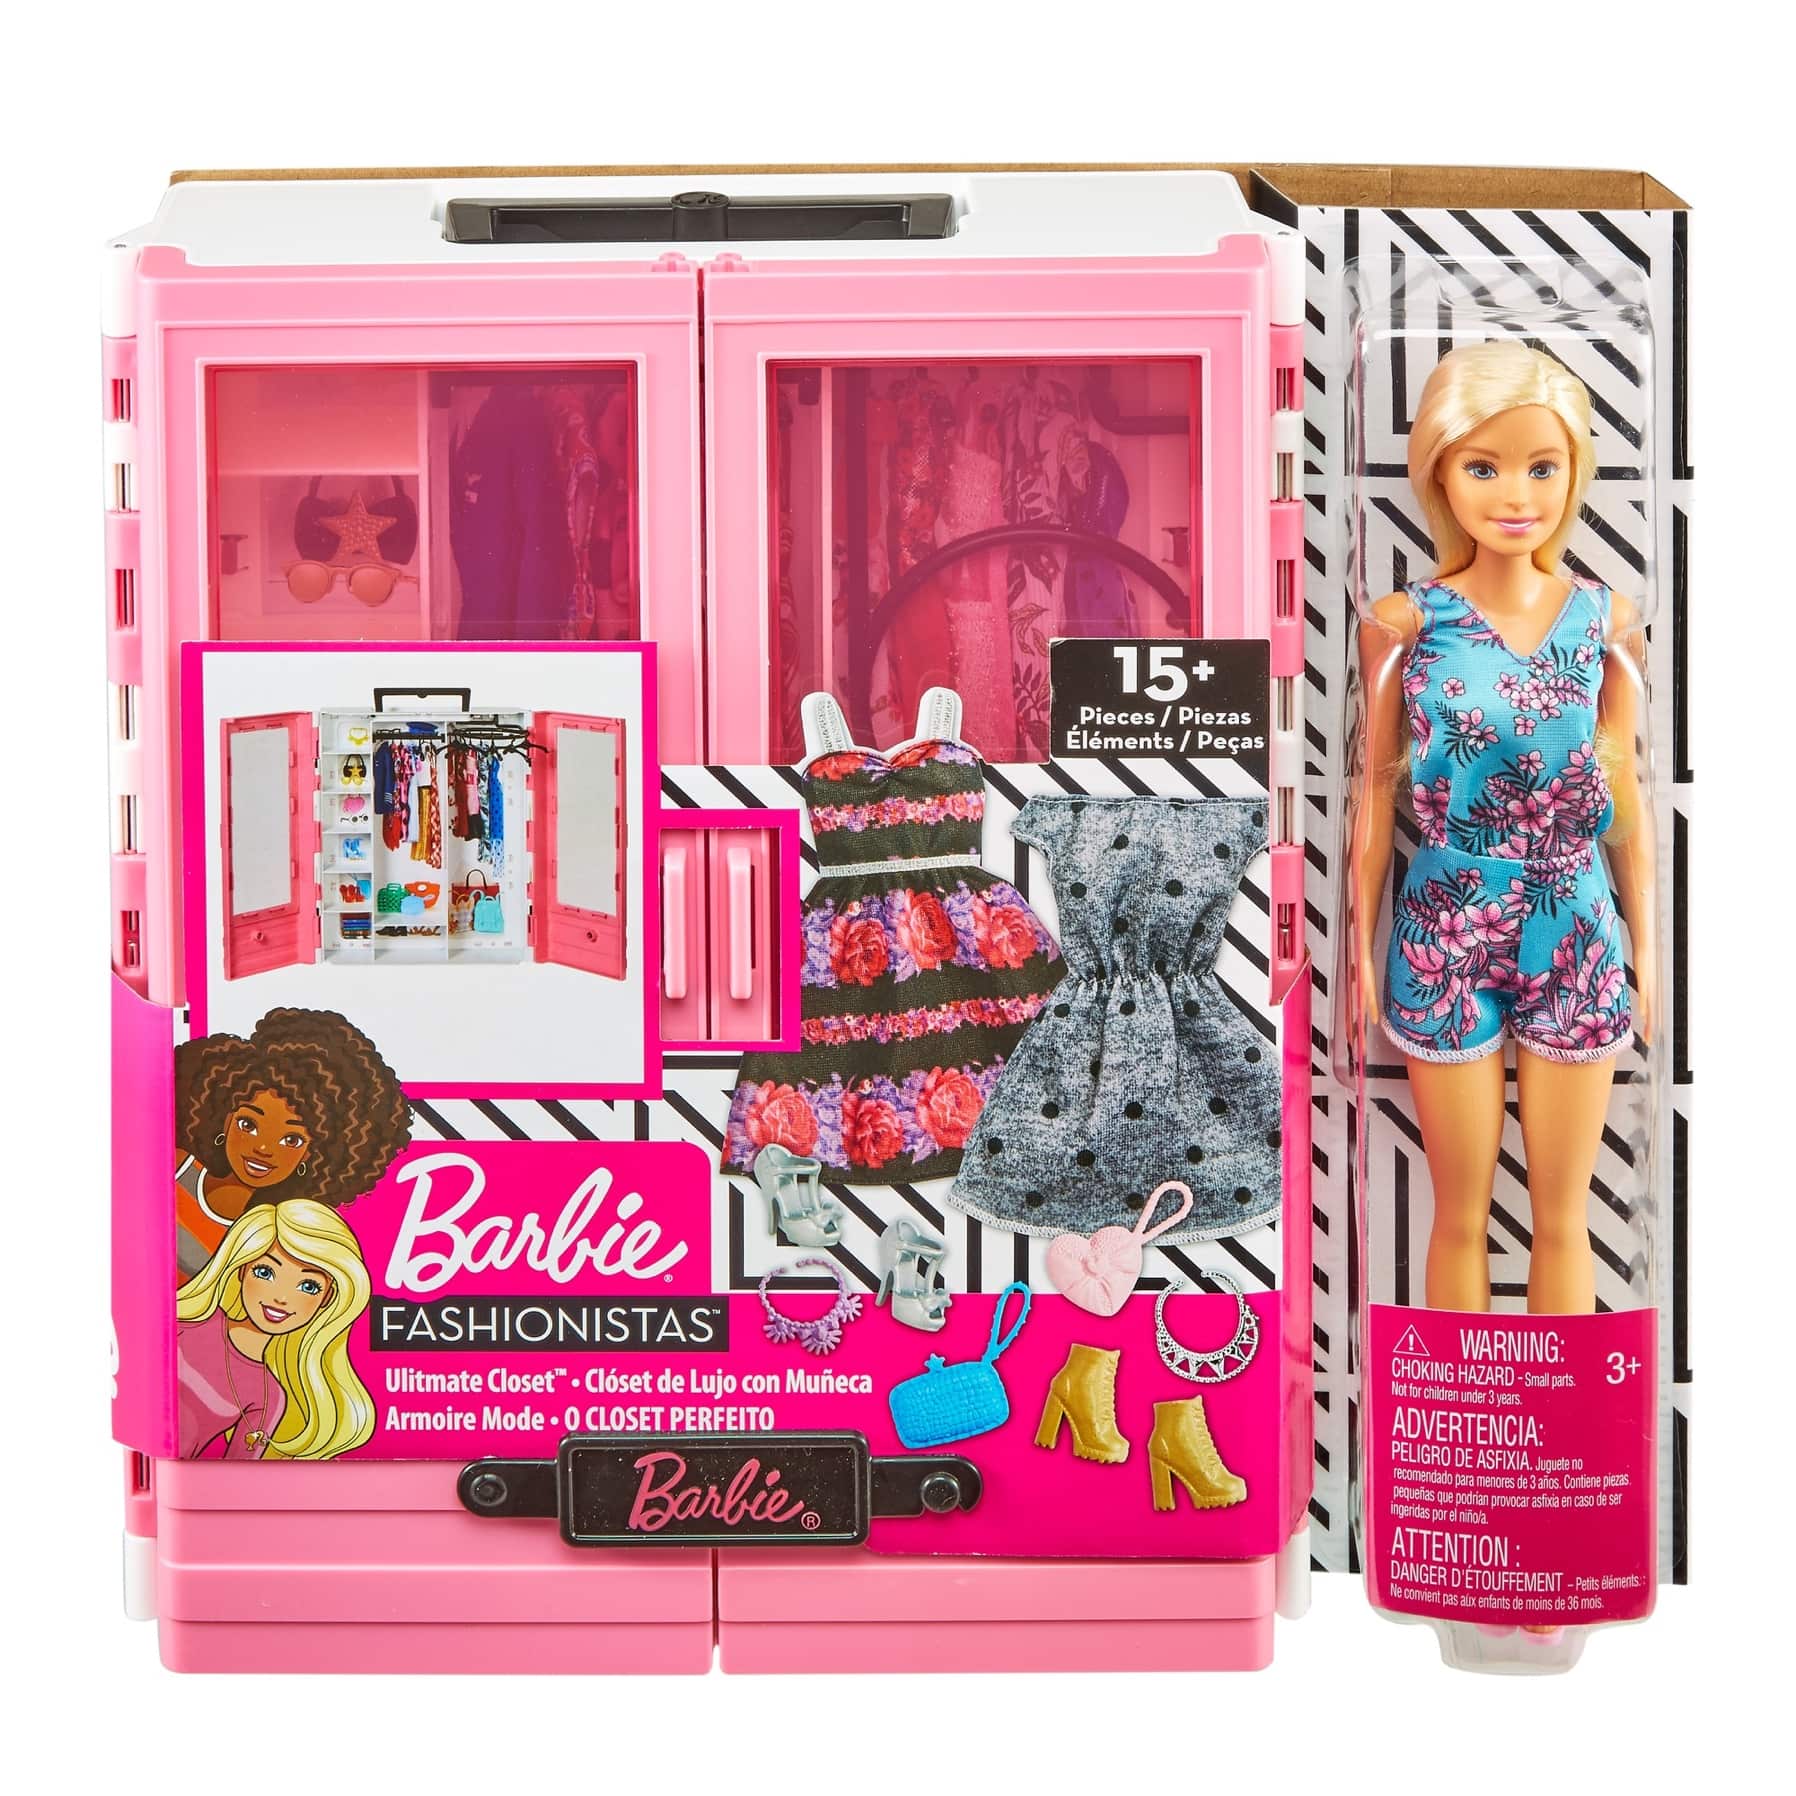 Buy Barbie Fashionistas Ultimate Closet, Doll & Accessories Online